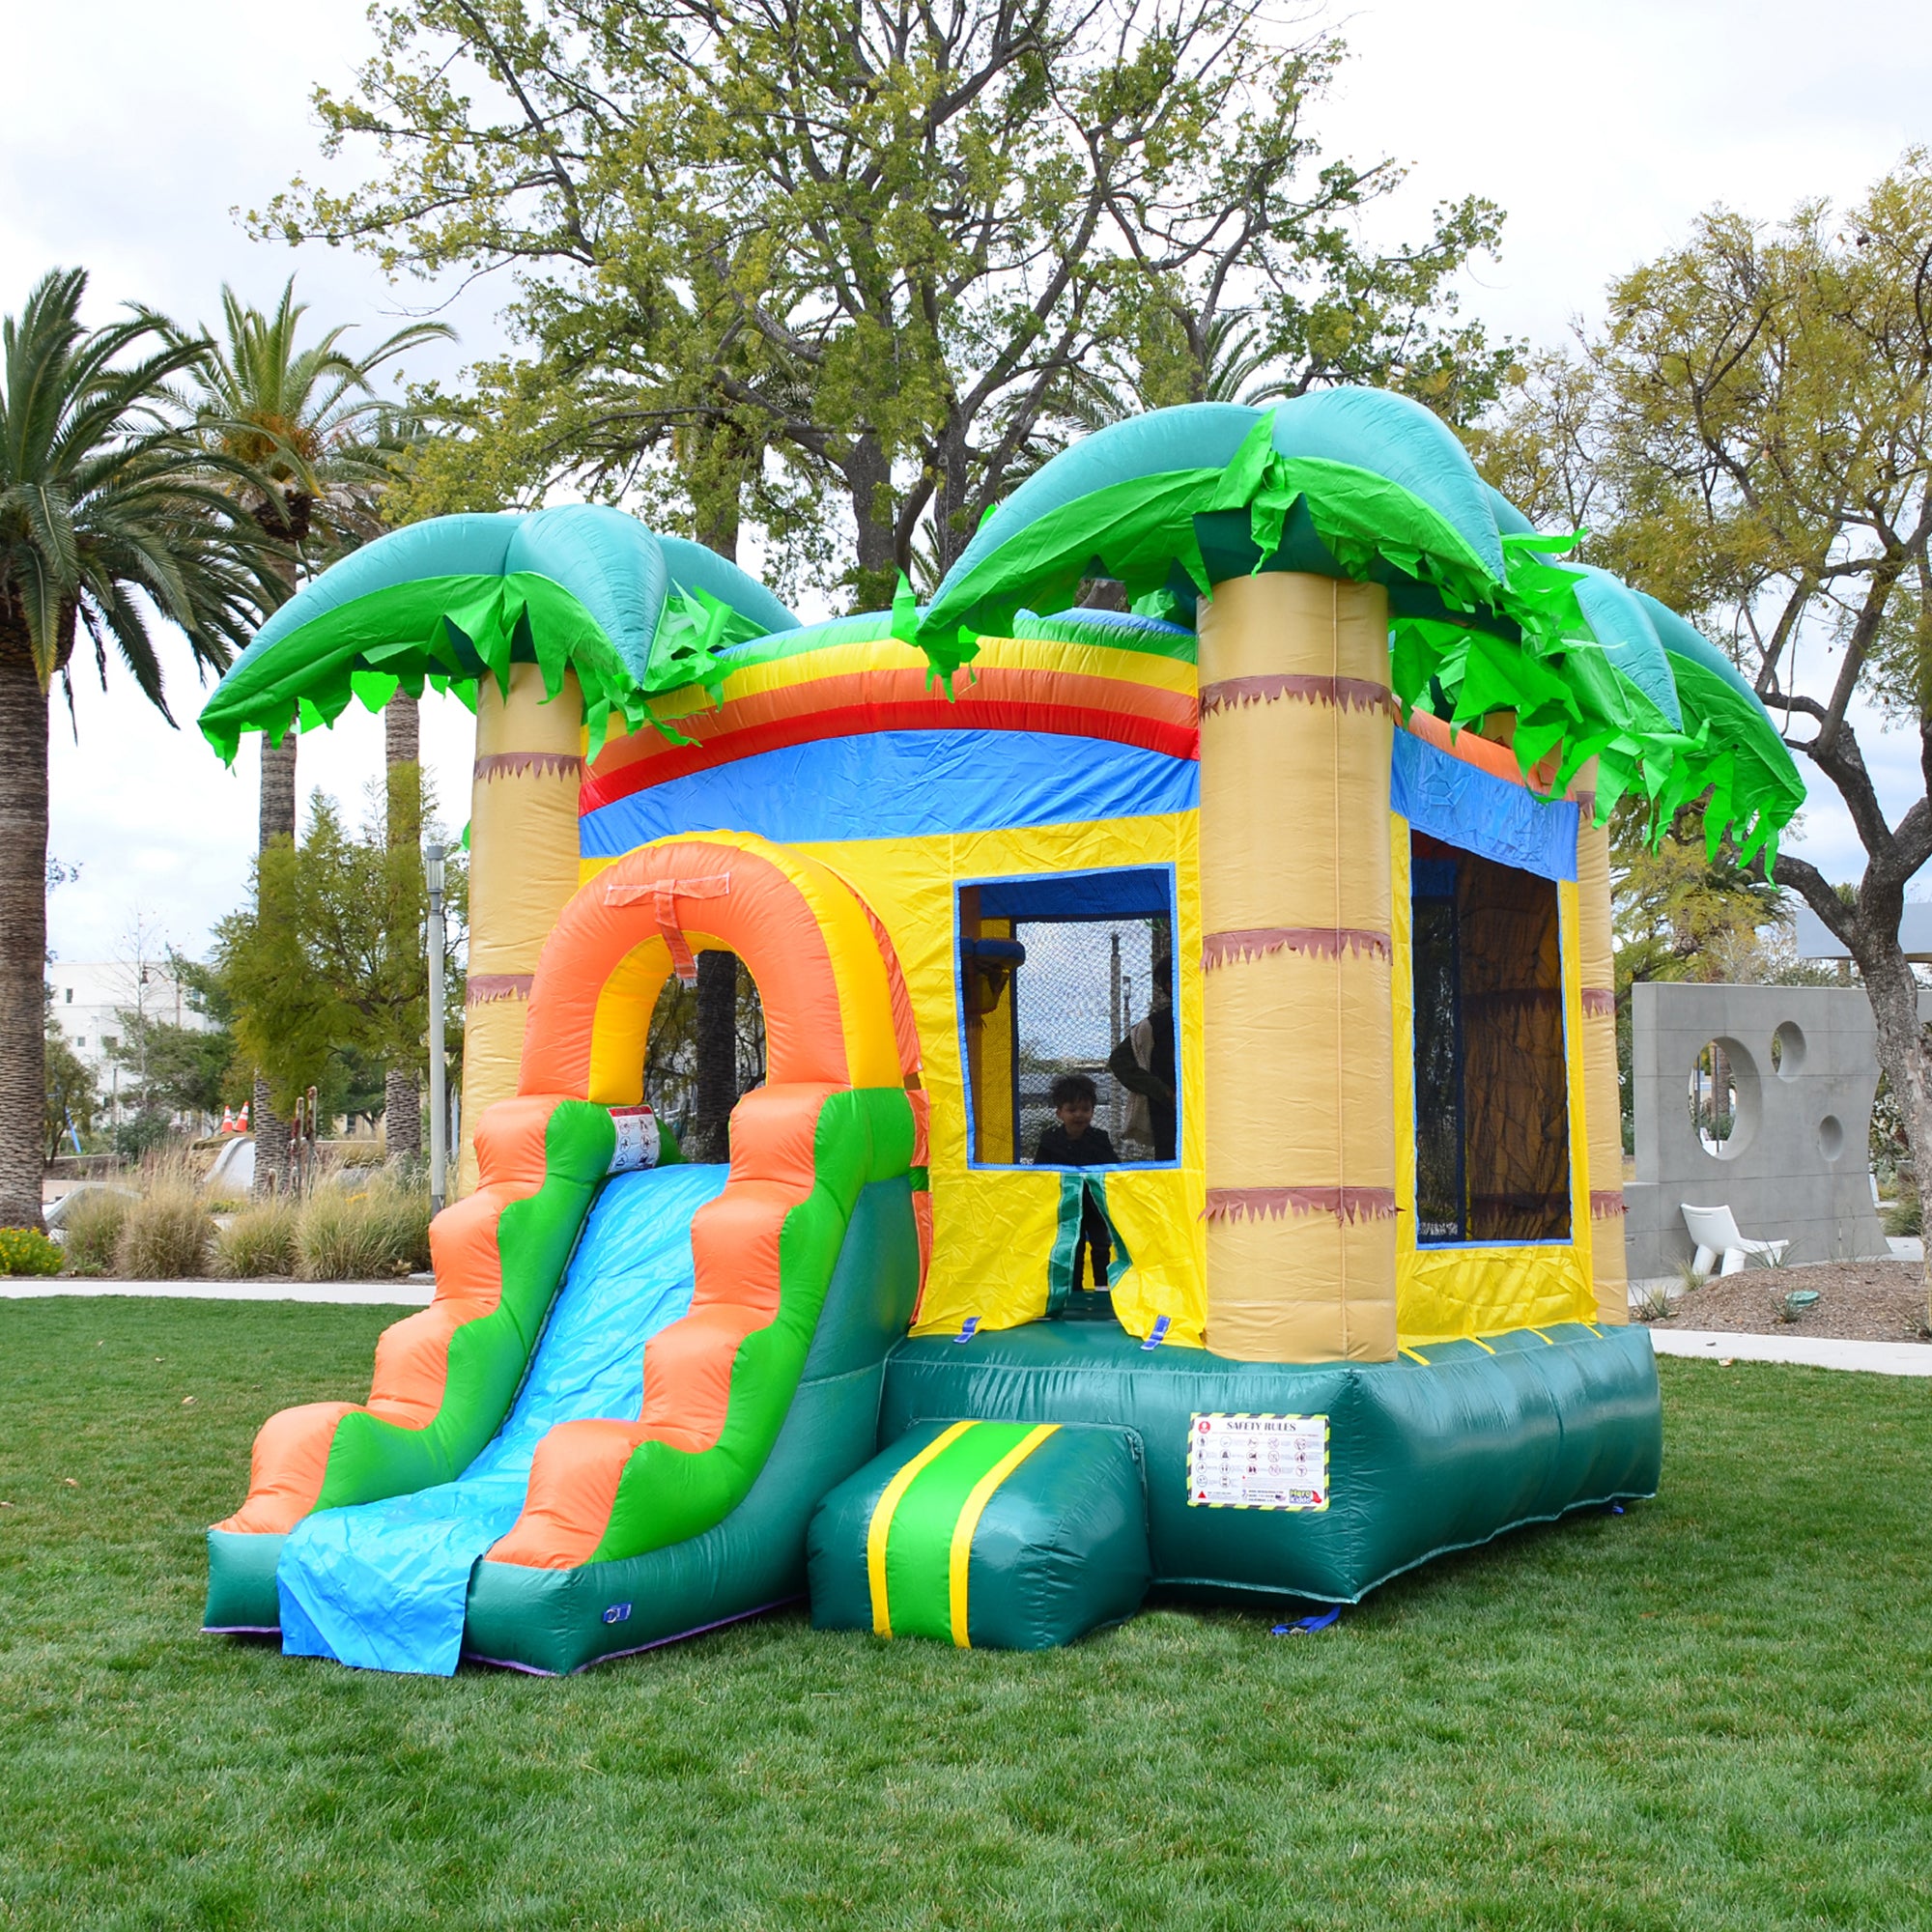 Ninja Warrior Combo, Inflatable, Interactive, Bounce Houses, Serving  Northwest Indiana, Chicago and the surrounding cities and suburbs